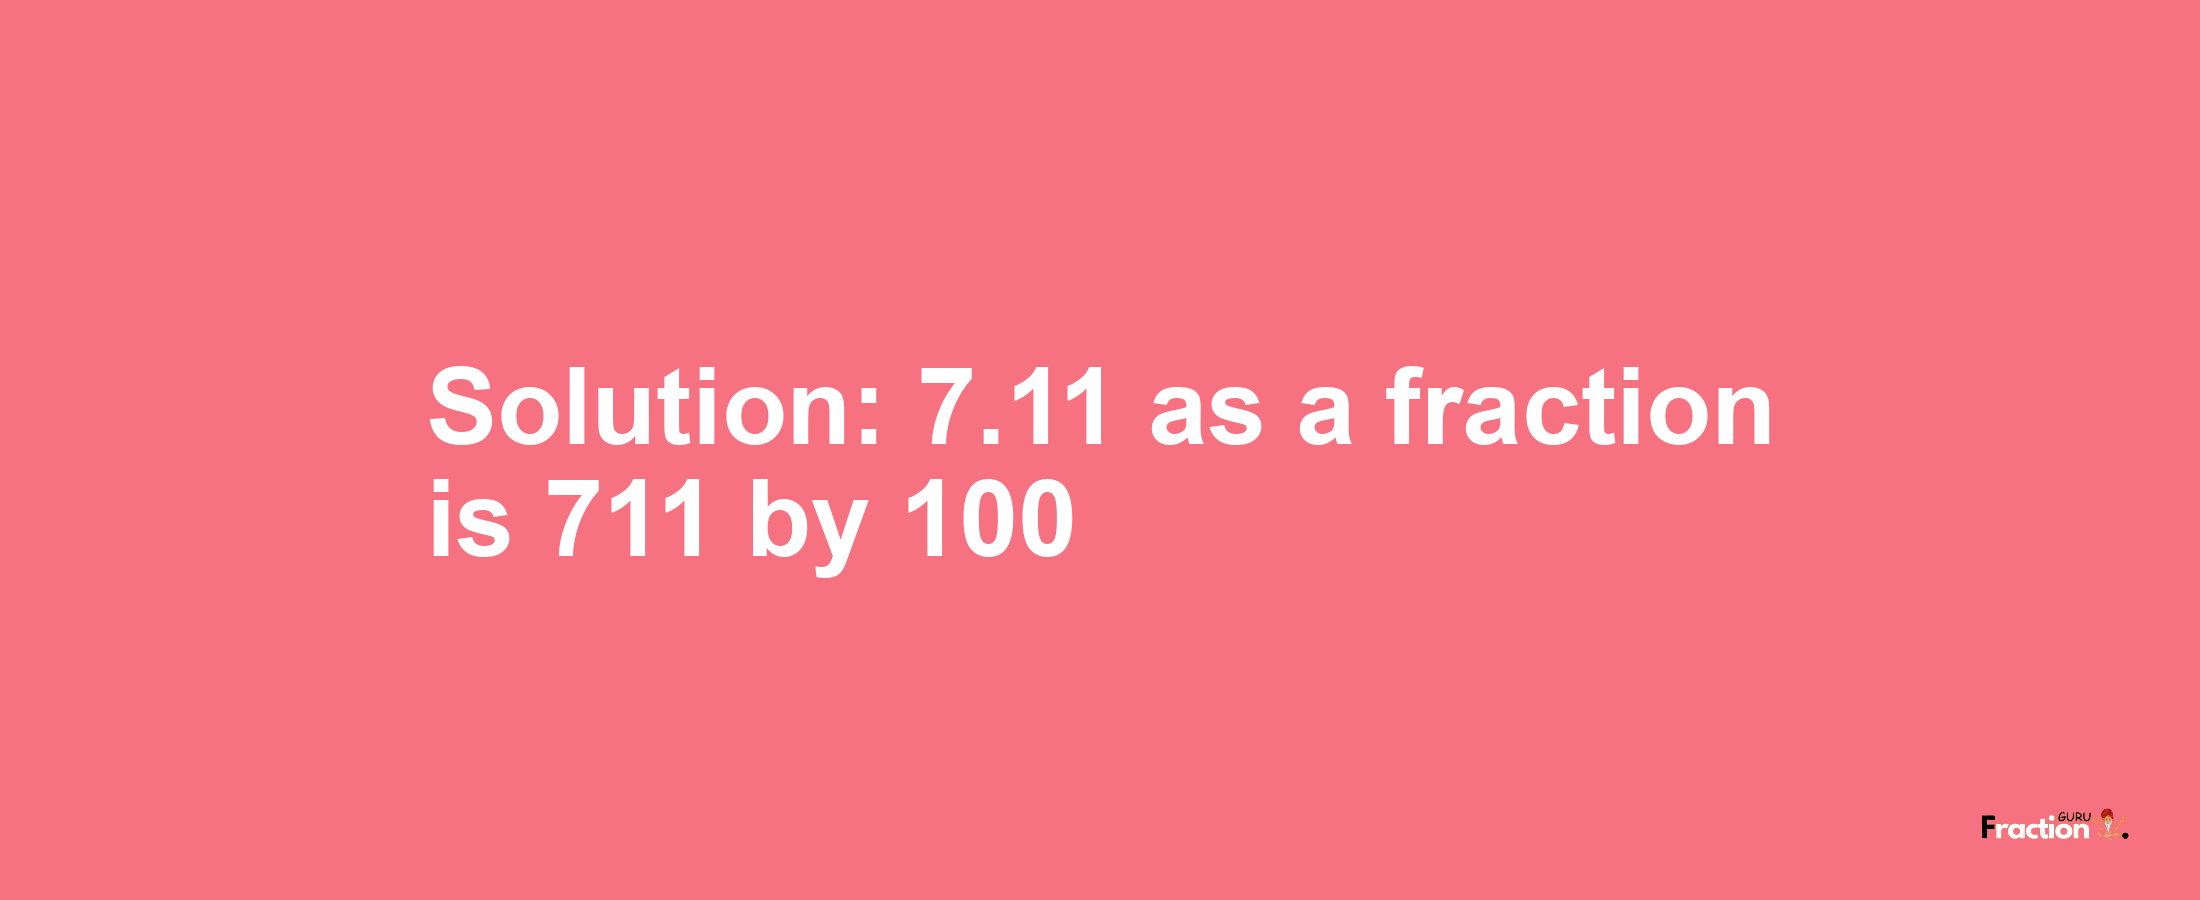 Solution:7.11 as a fraction is 711/100